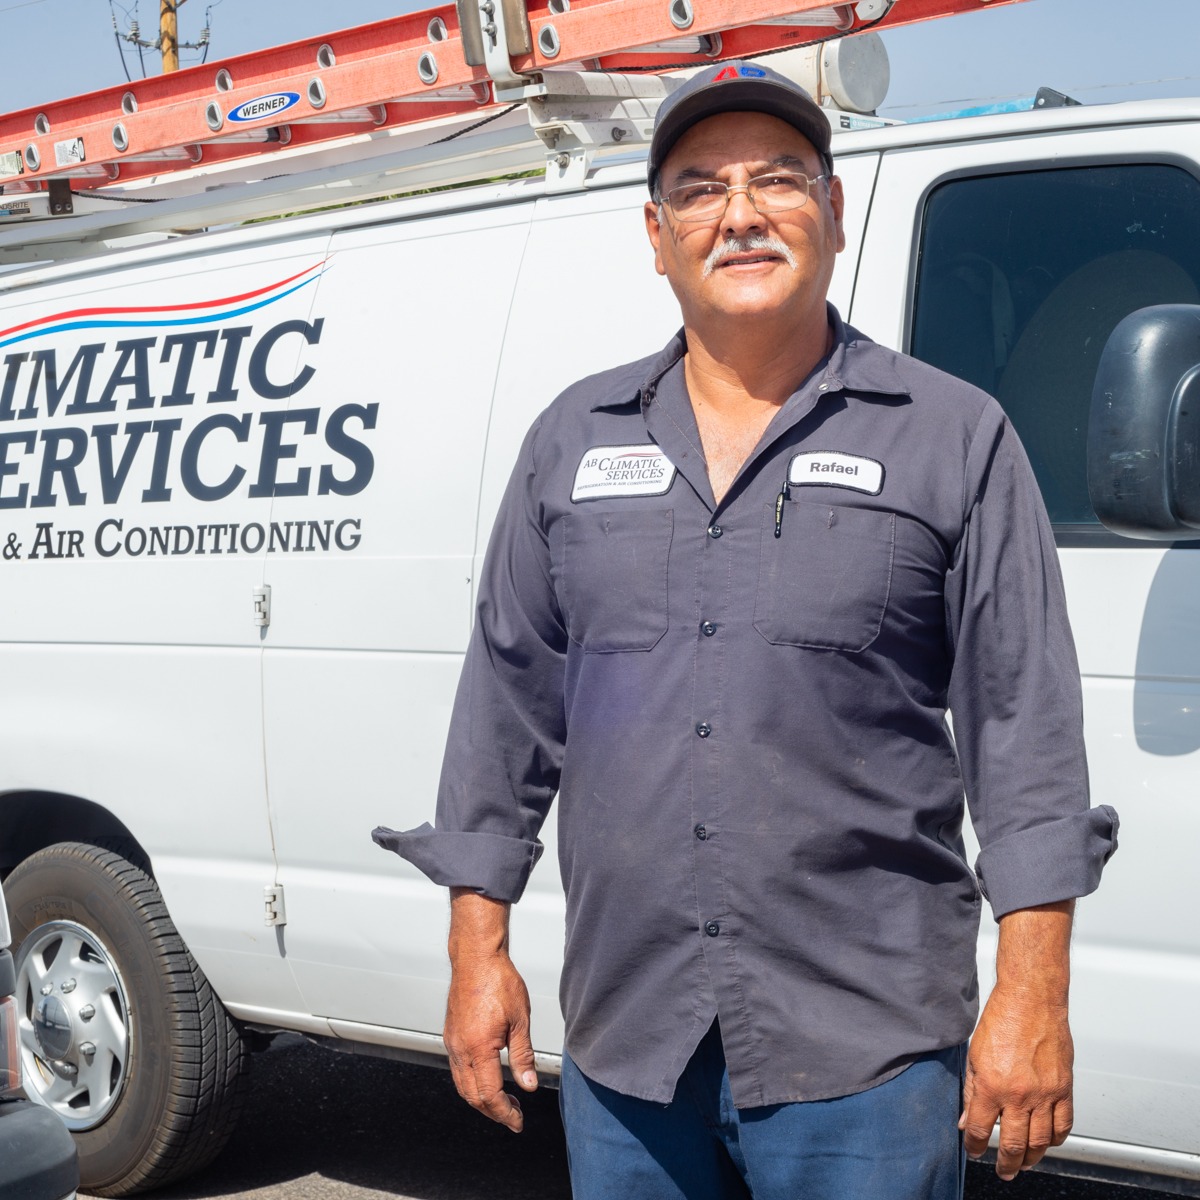 Meet our staff from AB Climatic Services in El Paso, TX